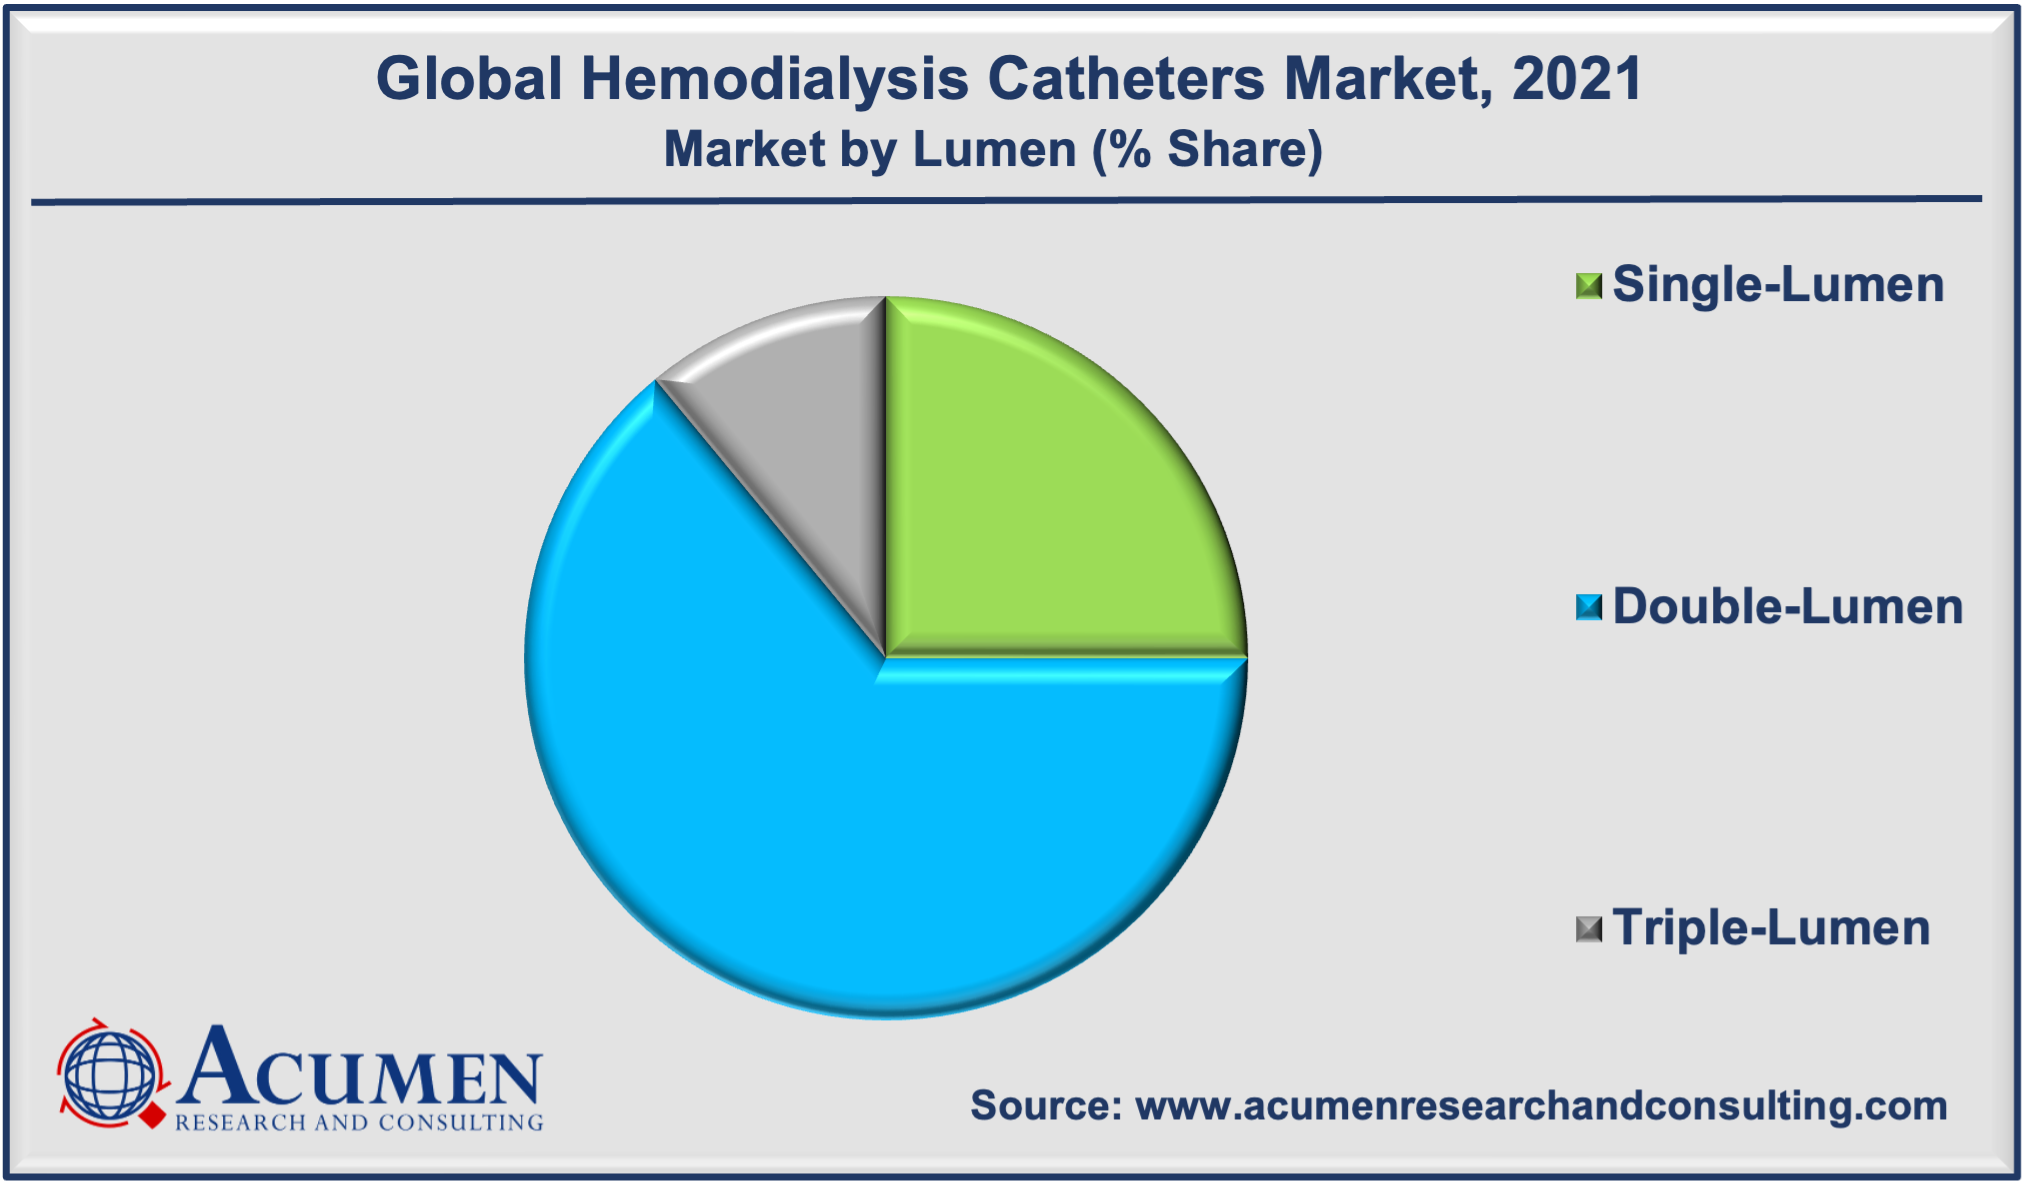 Hemodialysis Catheters Market Analysis accounted for USD 787 Million in 2021 and is estimated to reach the market value of USD 1,214 Million by 2030.